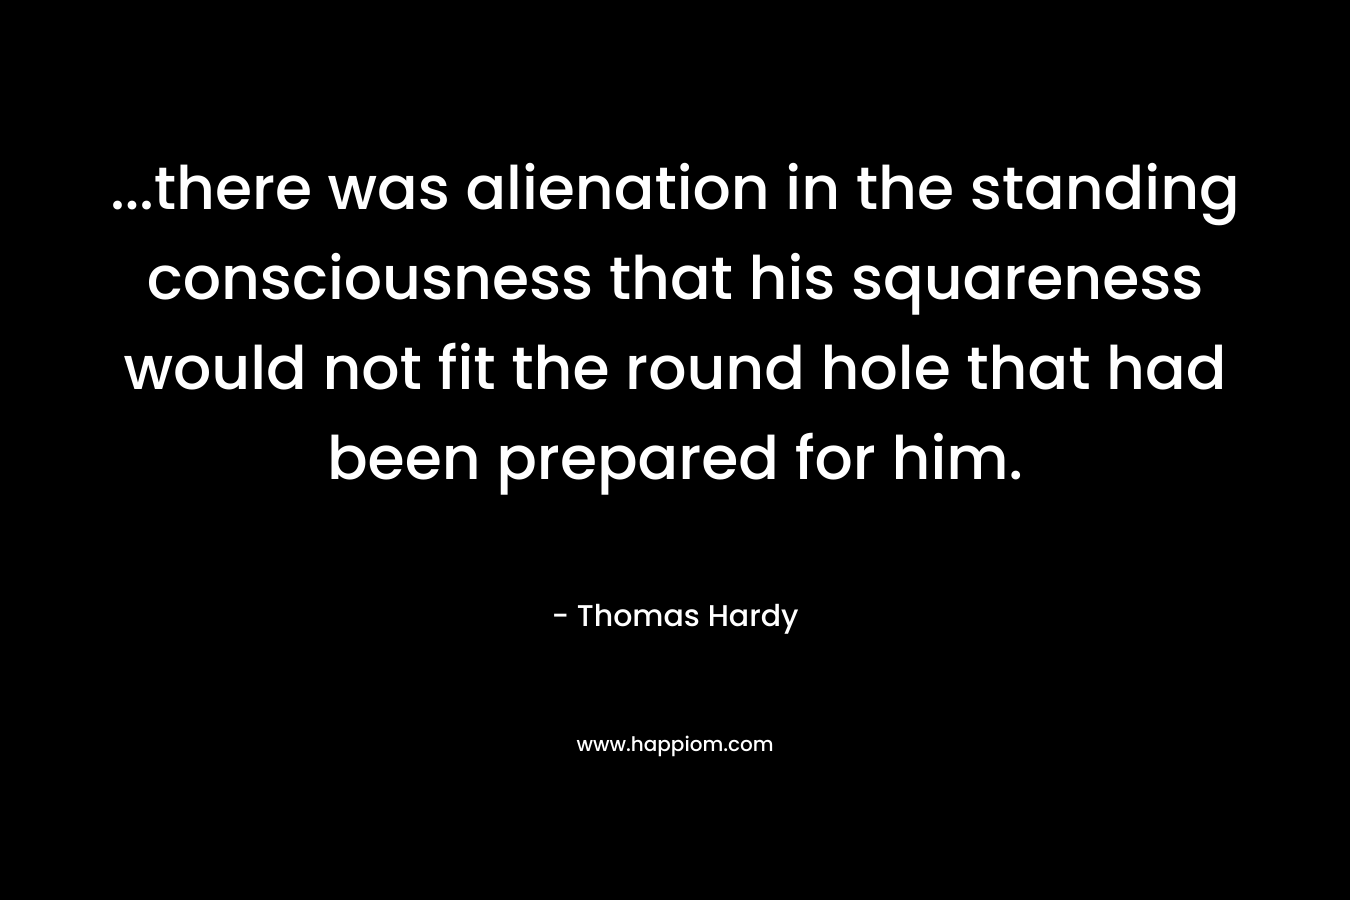 ...there was alienation in the standing consciousness that his squareness would not fit the round hole that had been prepared for him.